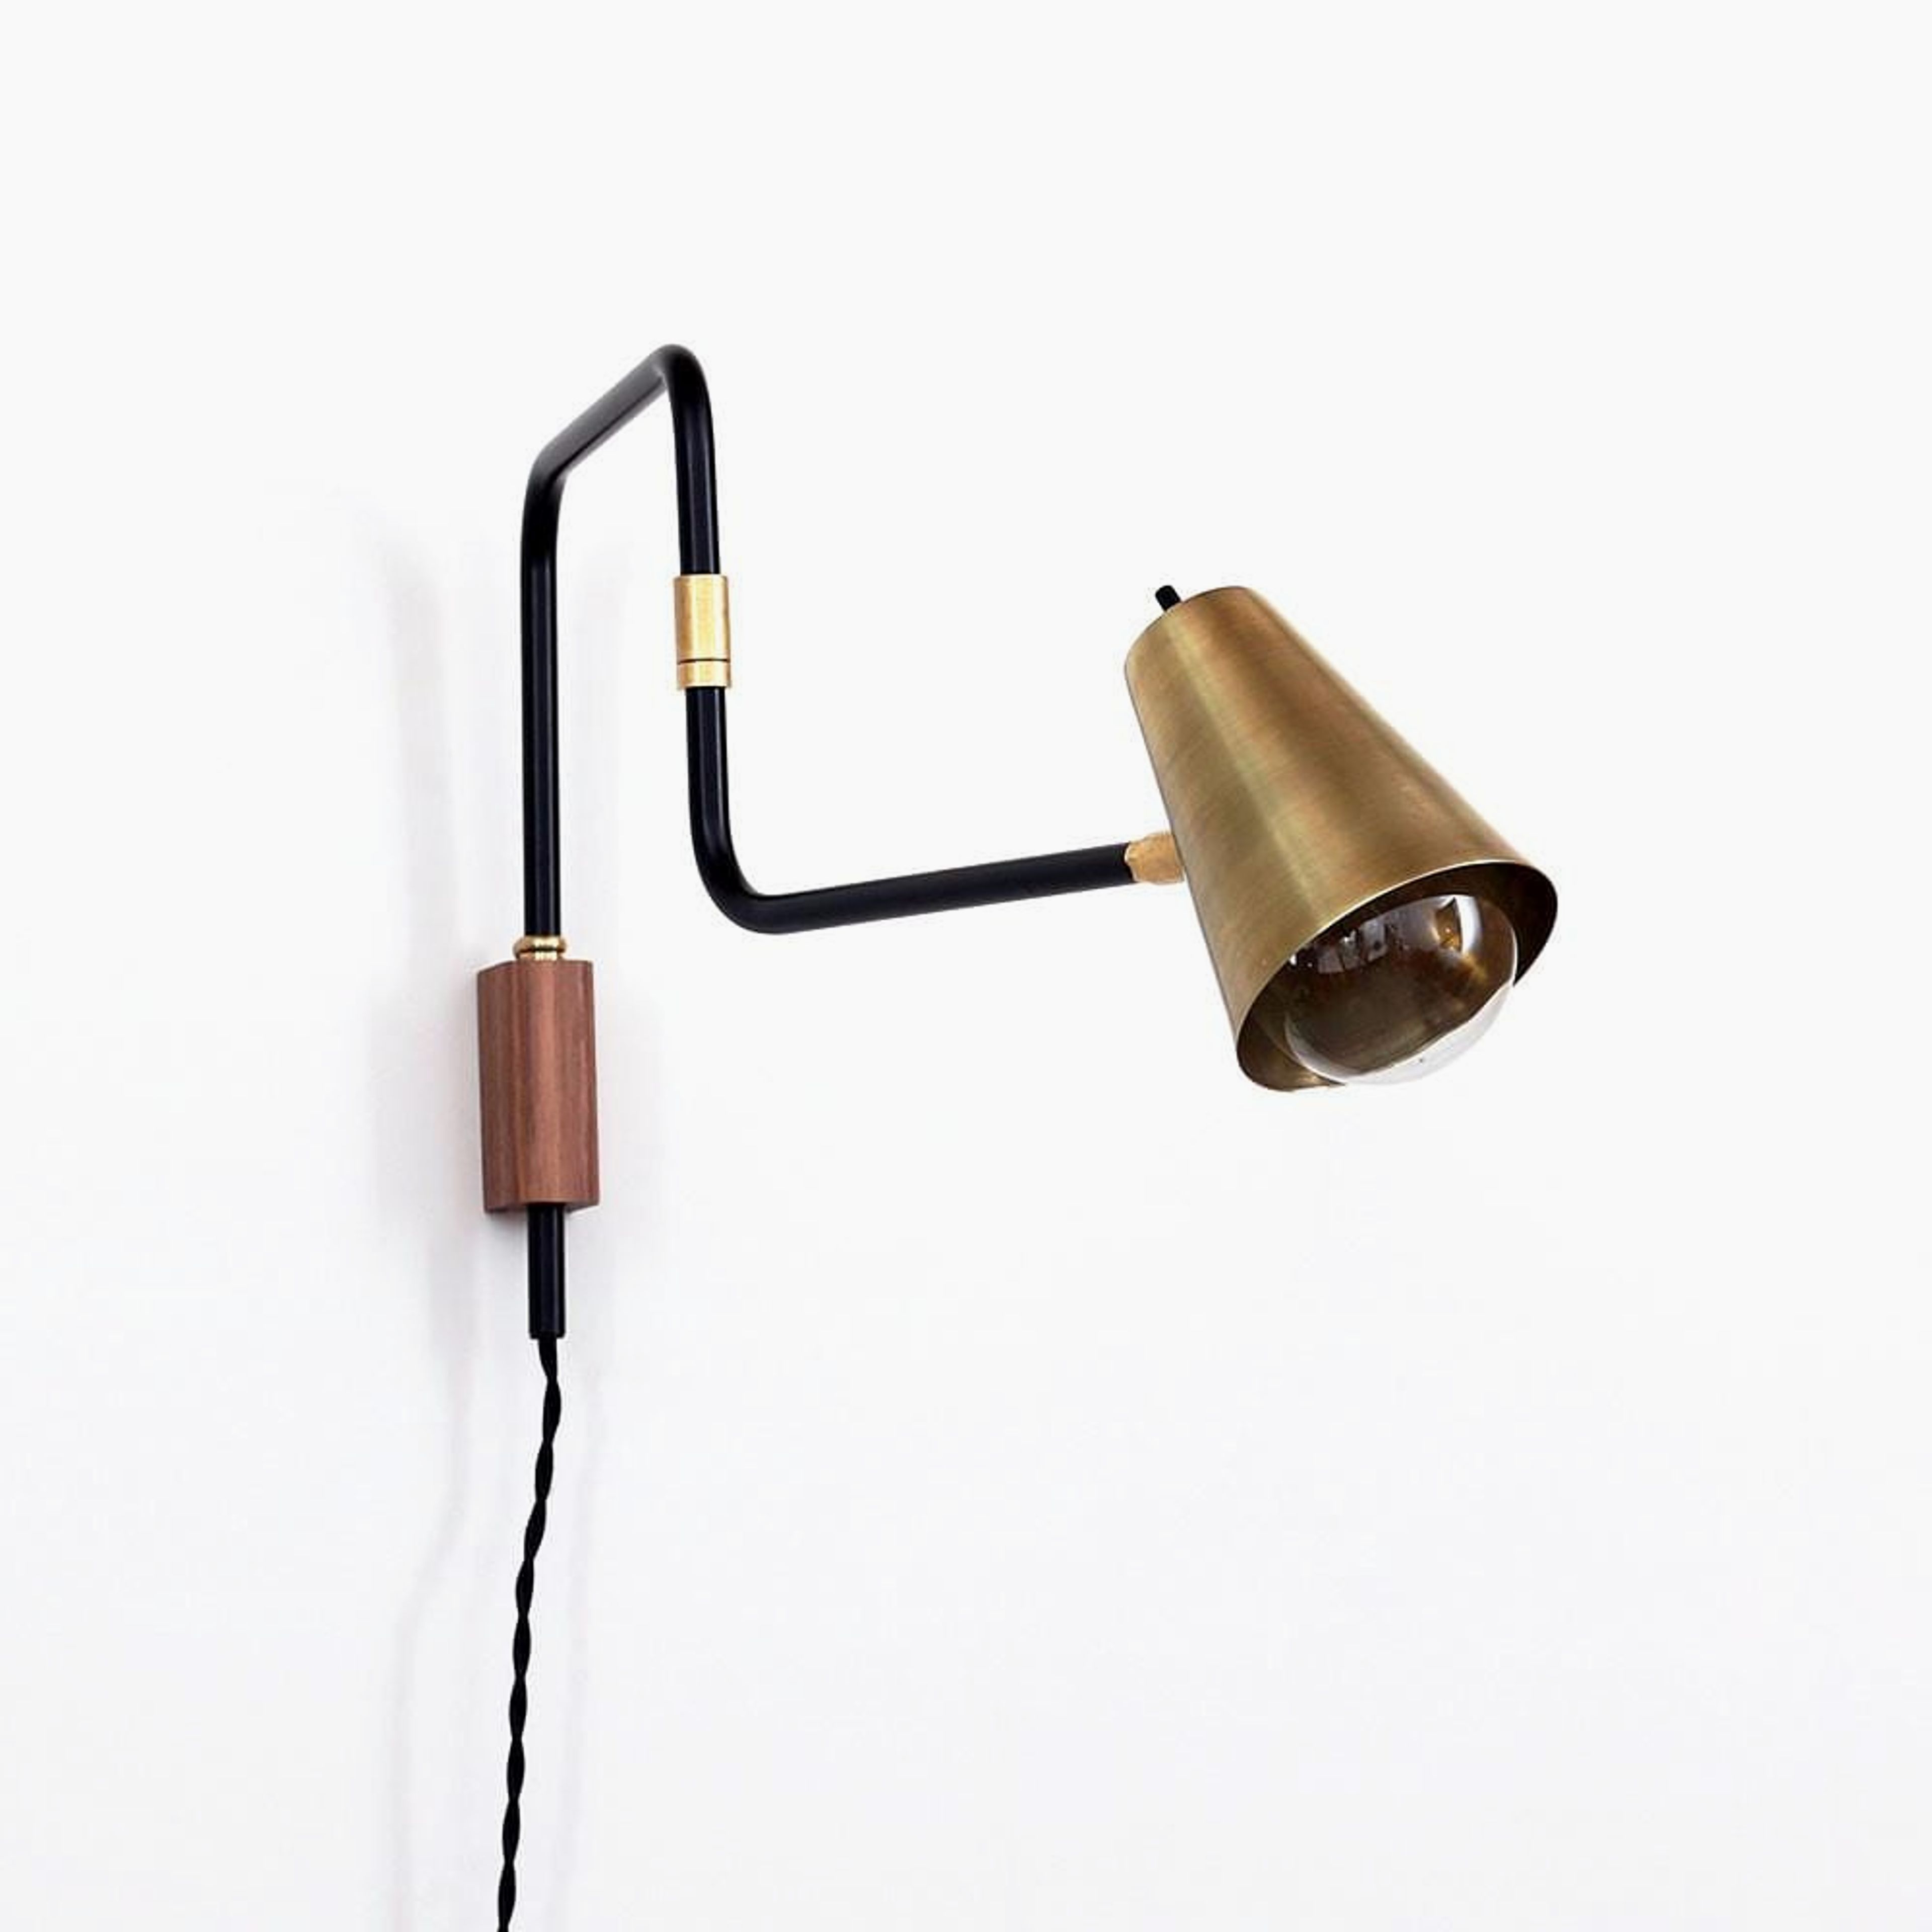 Double-jointed swing lamp